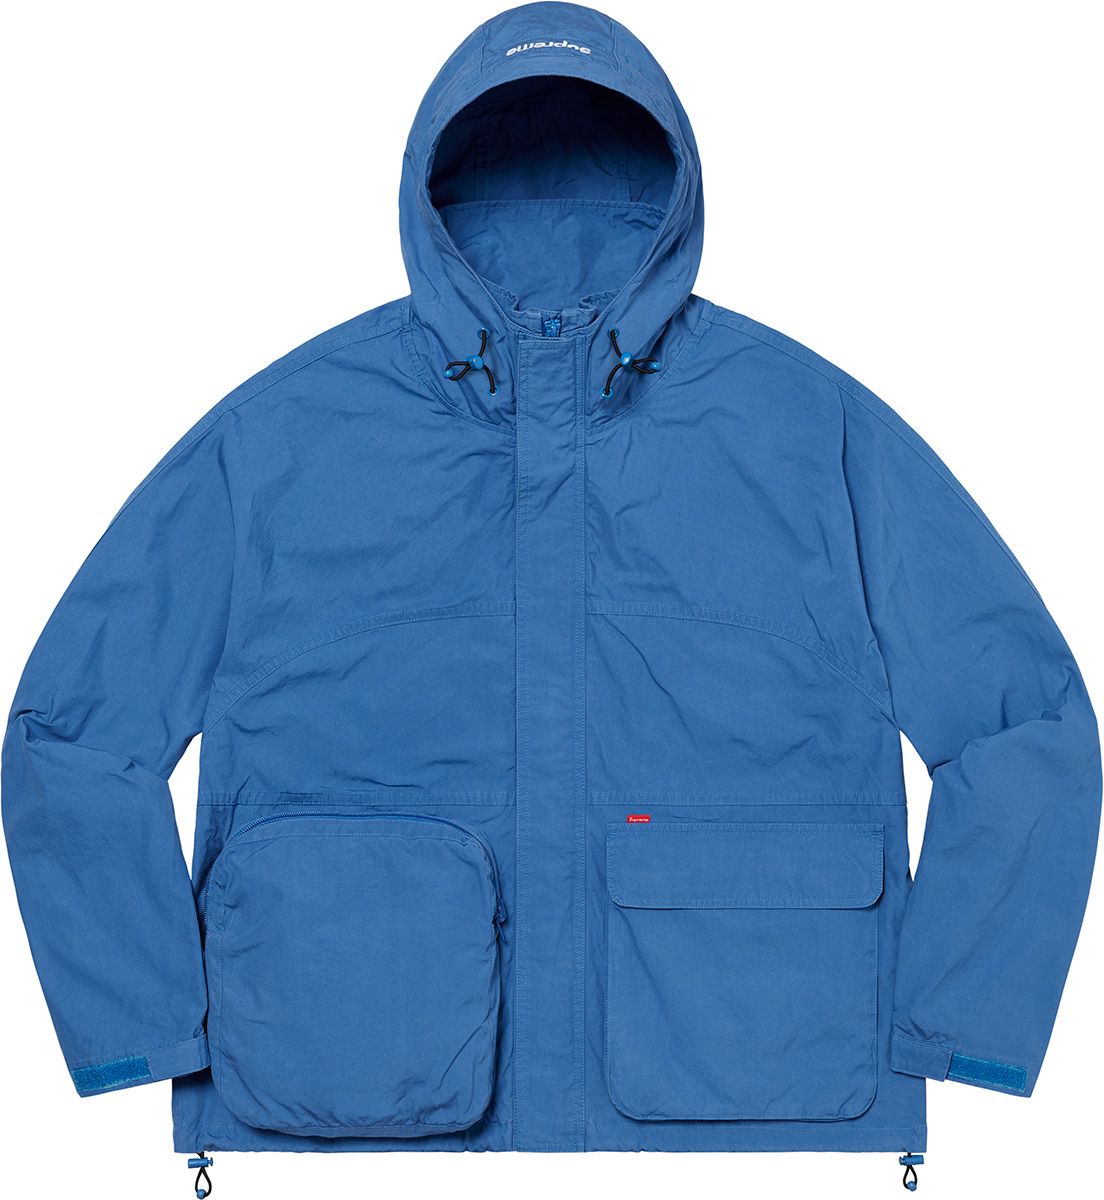 Technical Field Jacket - Fall/Winter 2020 Preview – Supreme